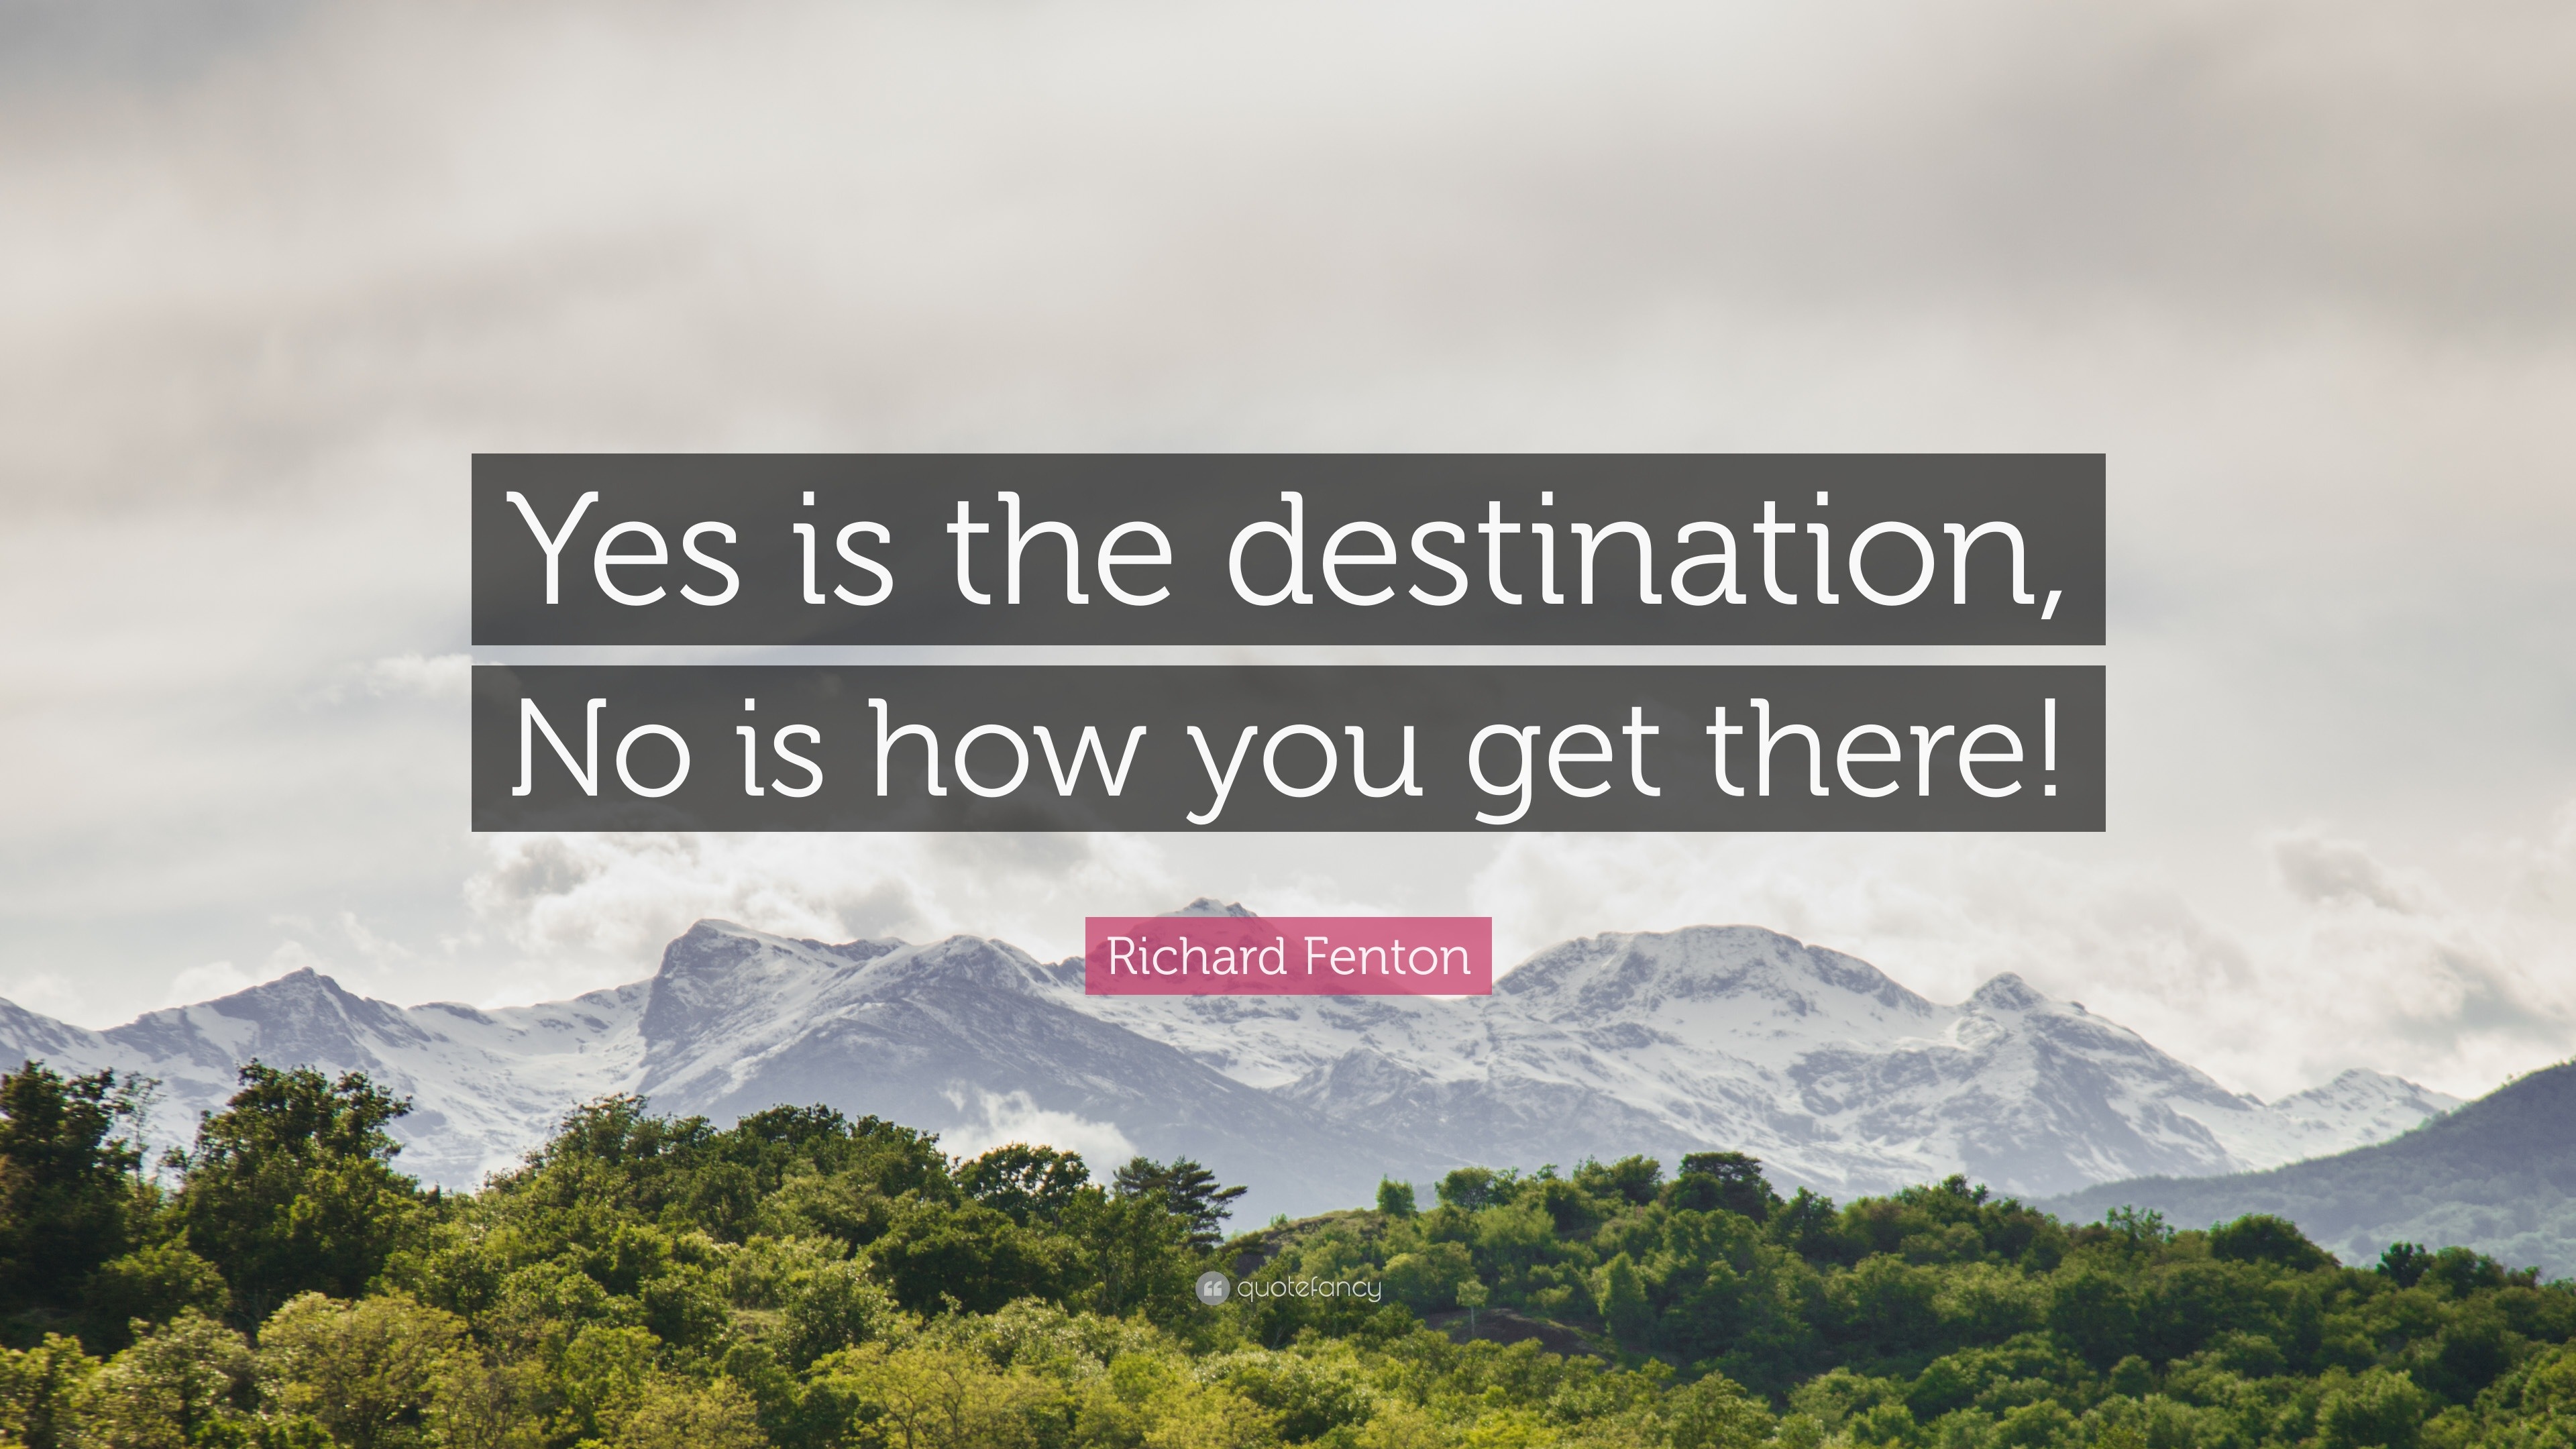 Go for No! : Yes is the Destination, No is How You Get There